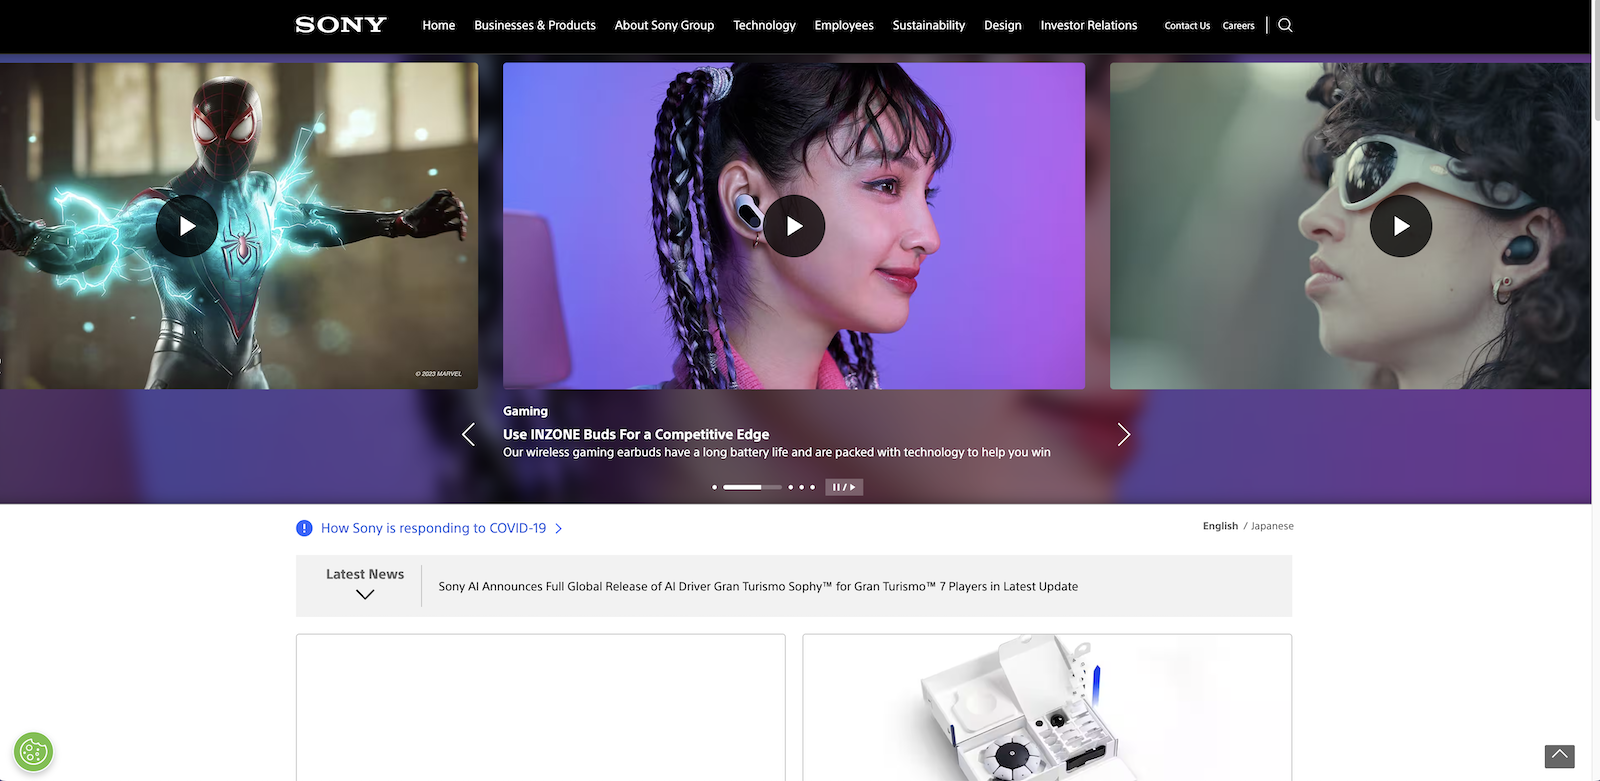 Sony's interactive website allows Internet users to learn about the brand's products and services.